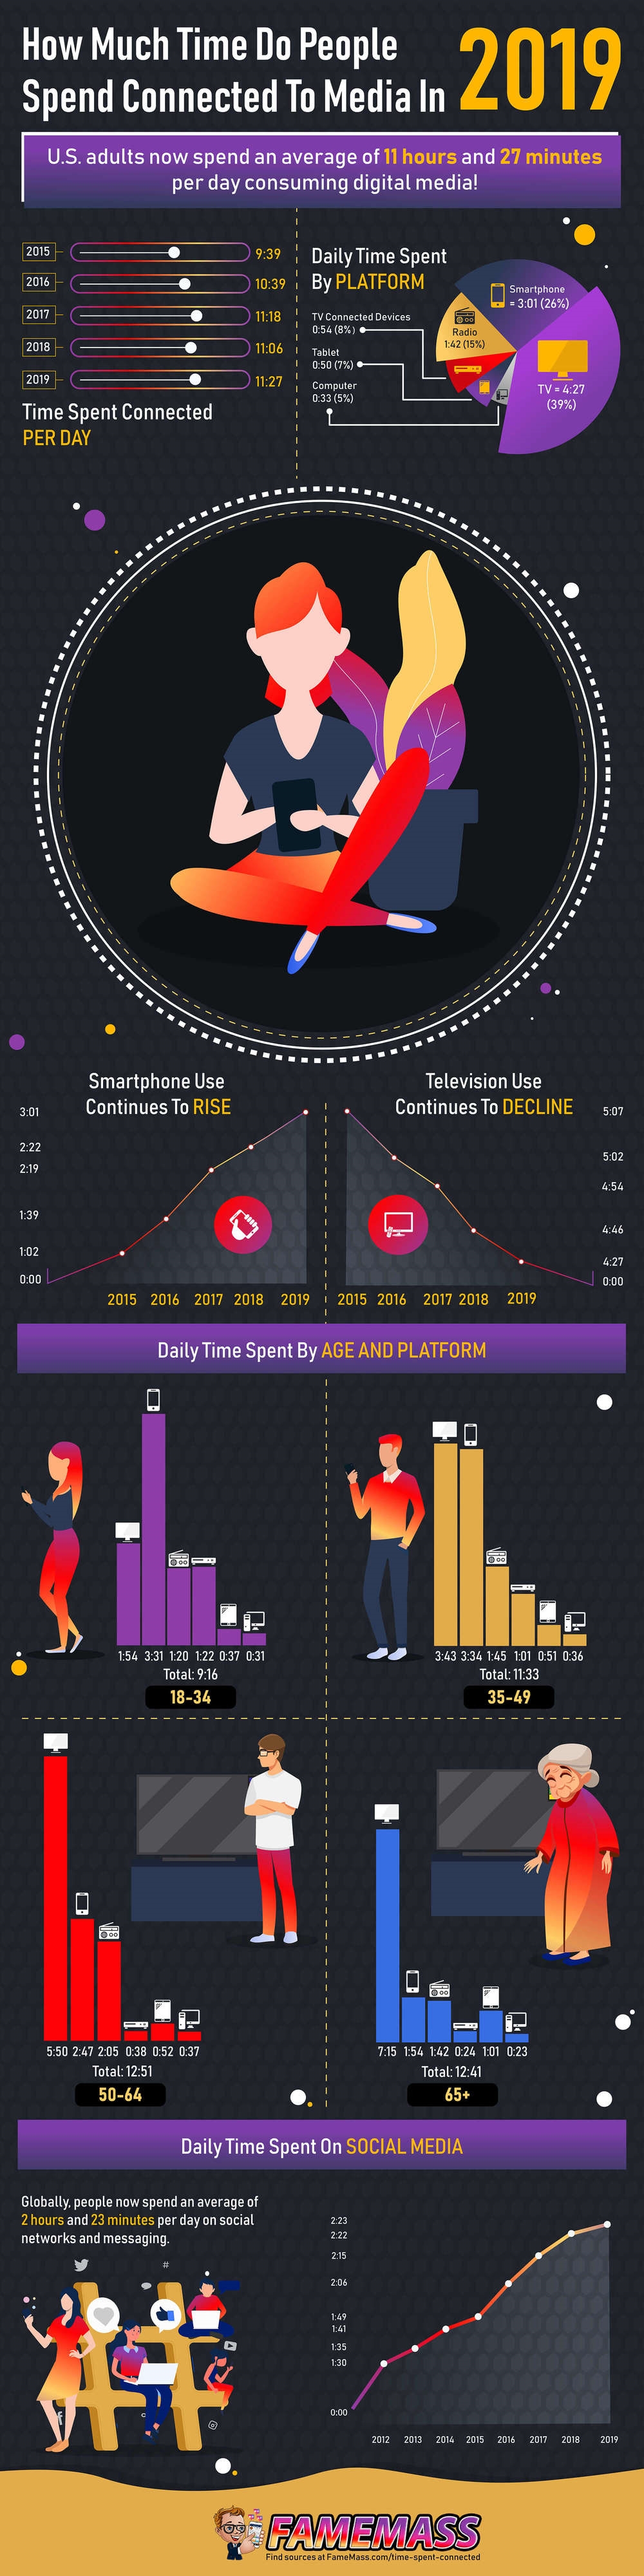 How Much Time Do Consumers Spend Connected to Digital Media? [Infographic]